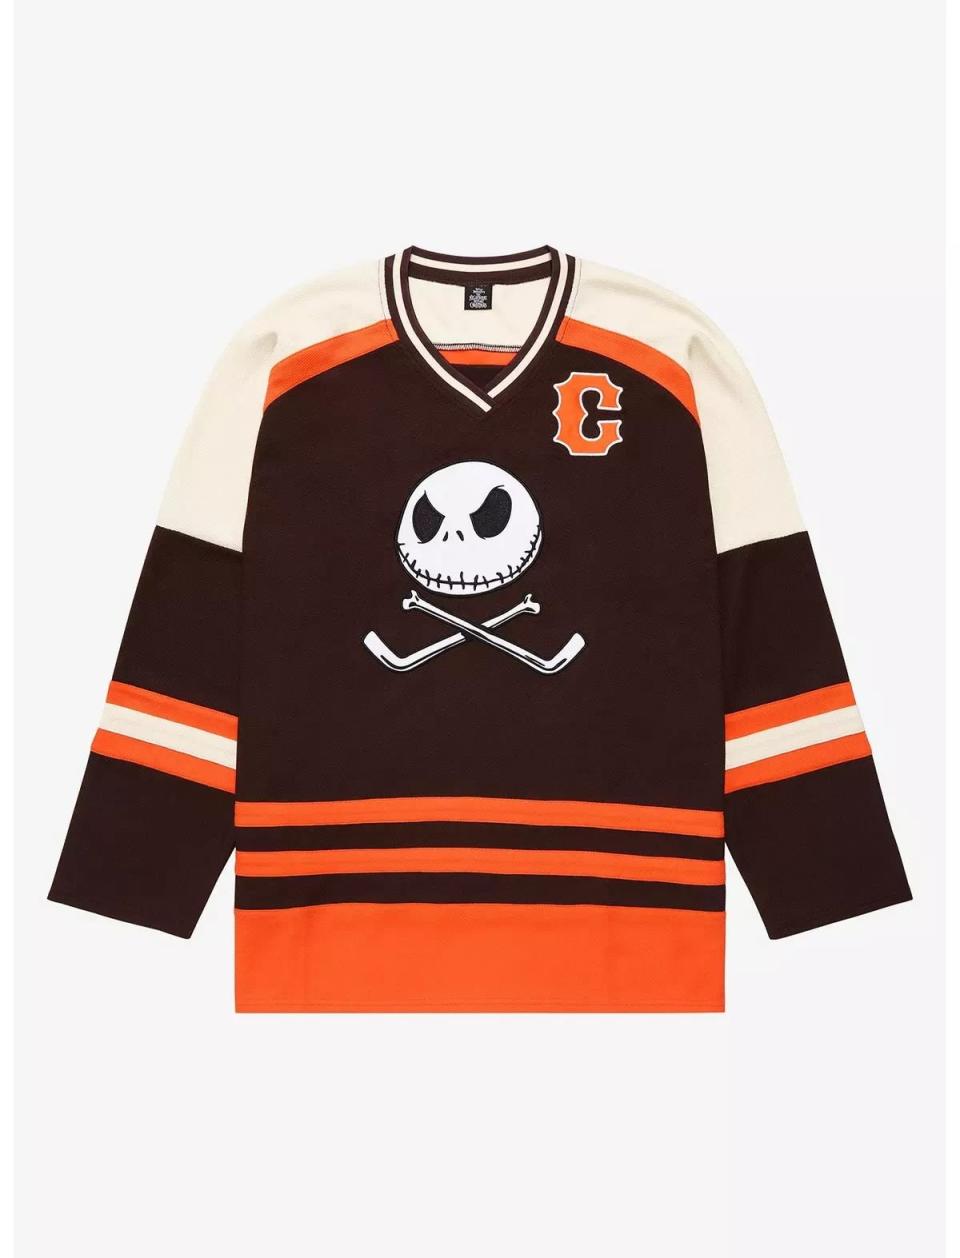 BoxLunch Nightmare Before Christmas 30th Anniversary Collection - hockey shirt